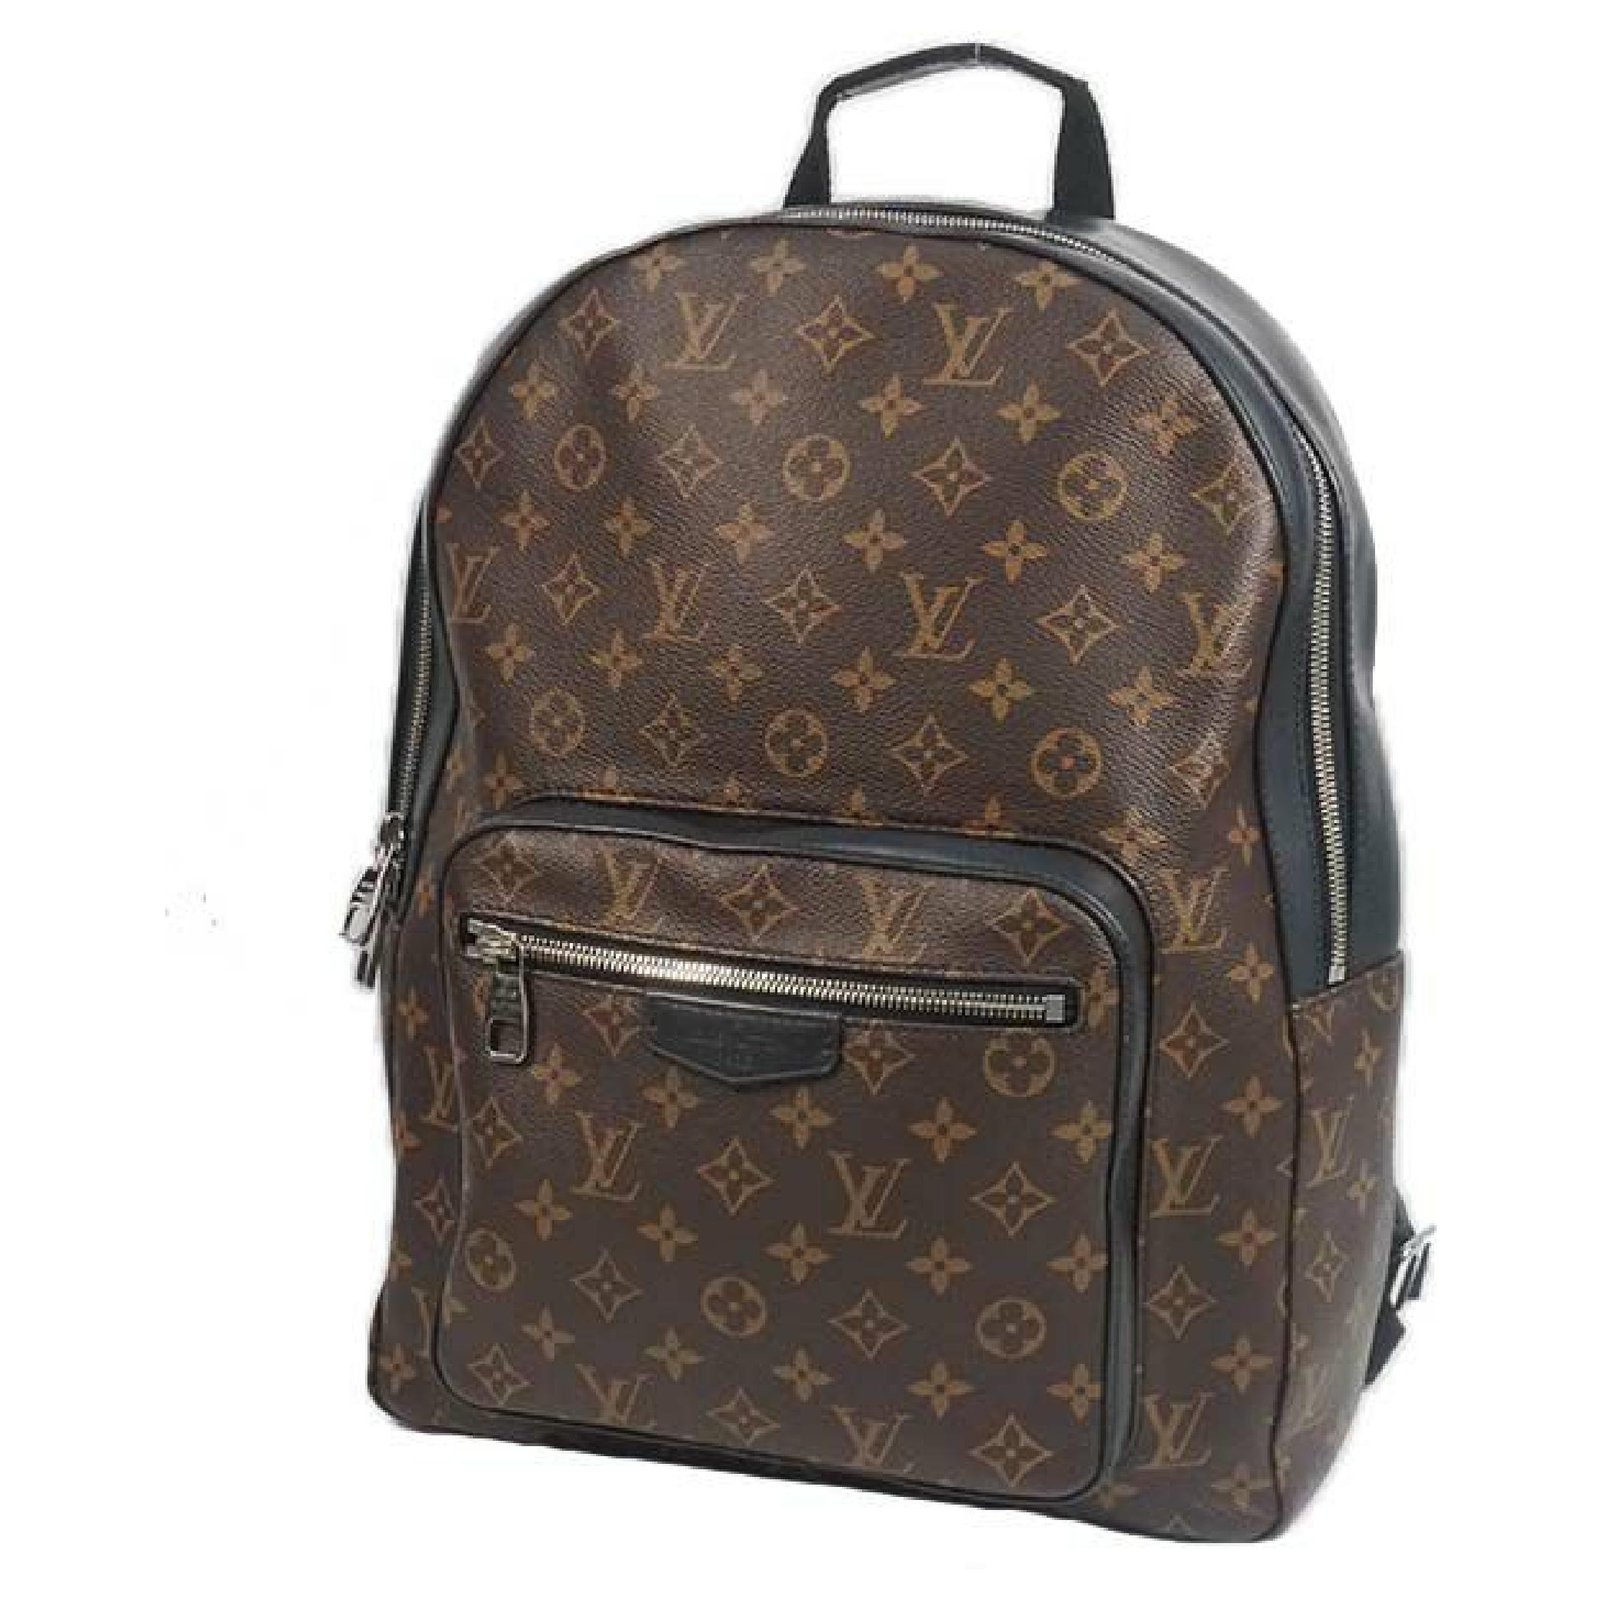 LOUIS VUITTON Josh Backpack Mens ruck sack Daypack M41530 Leather